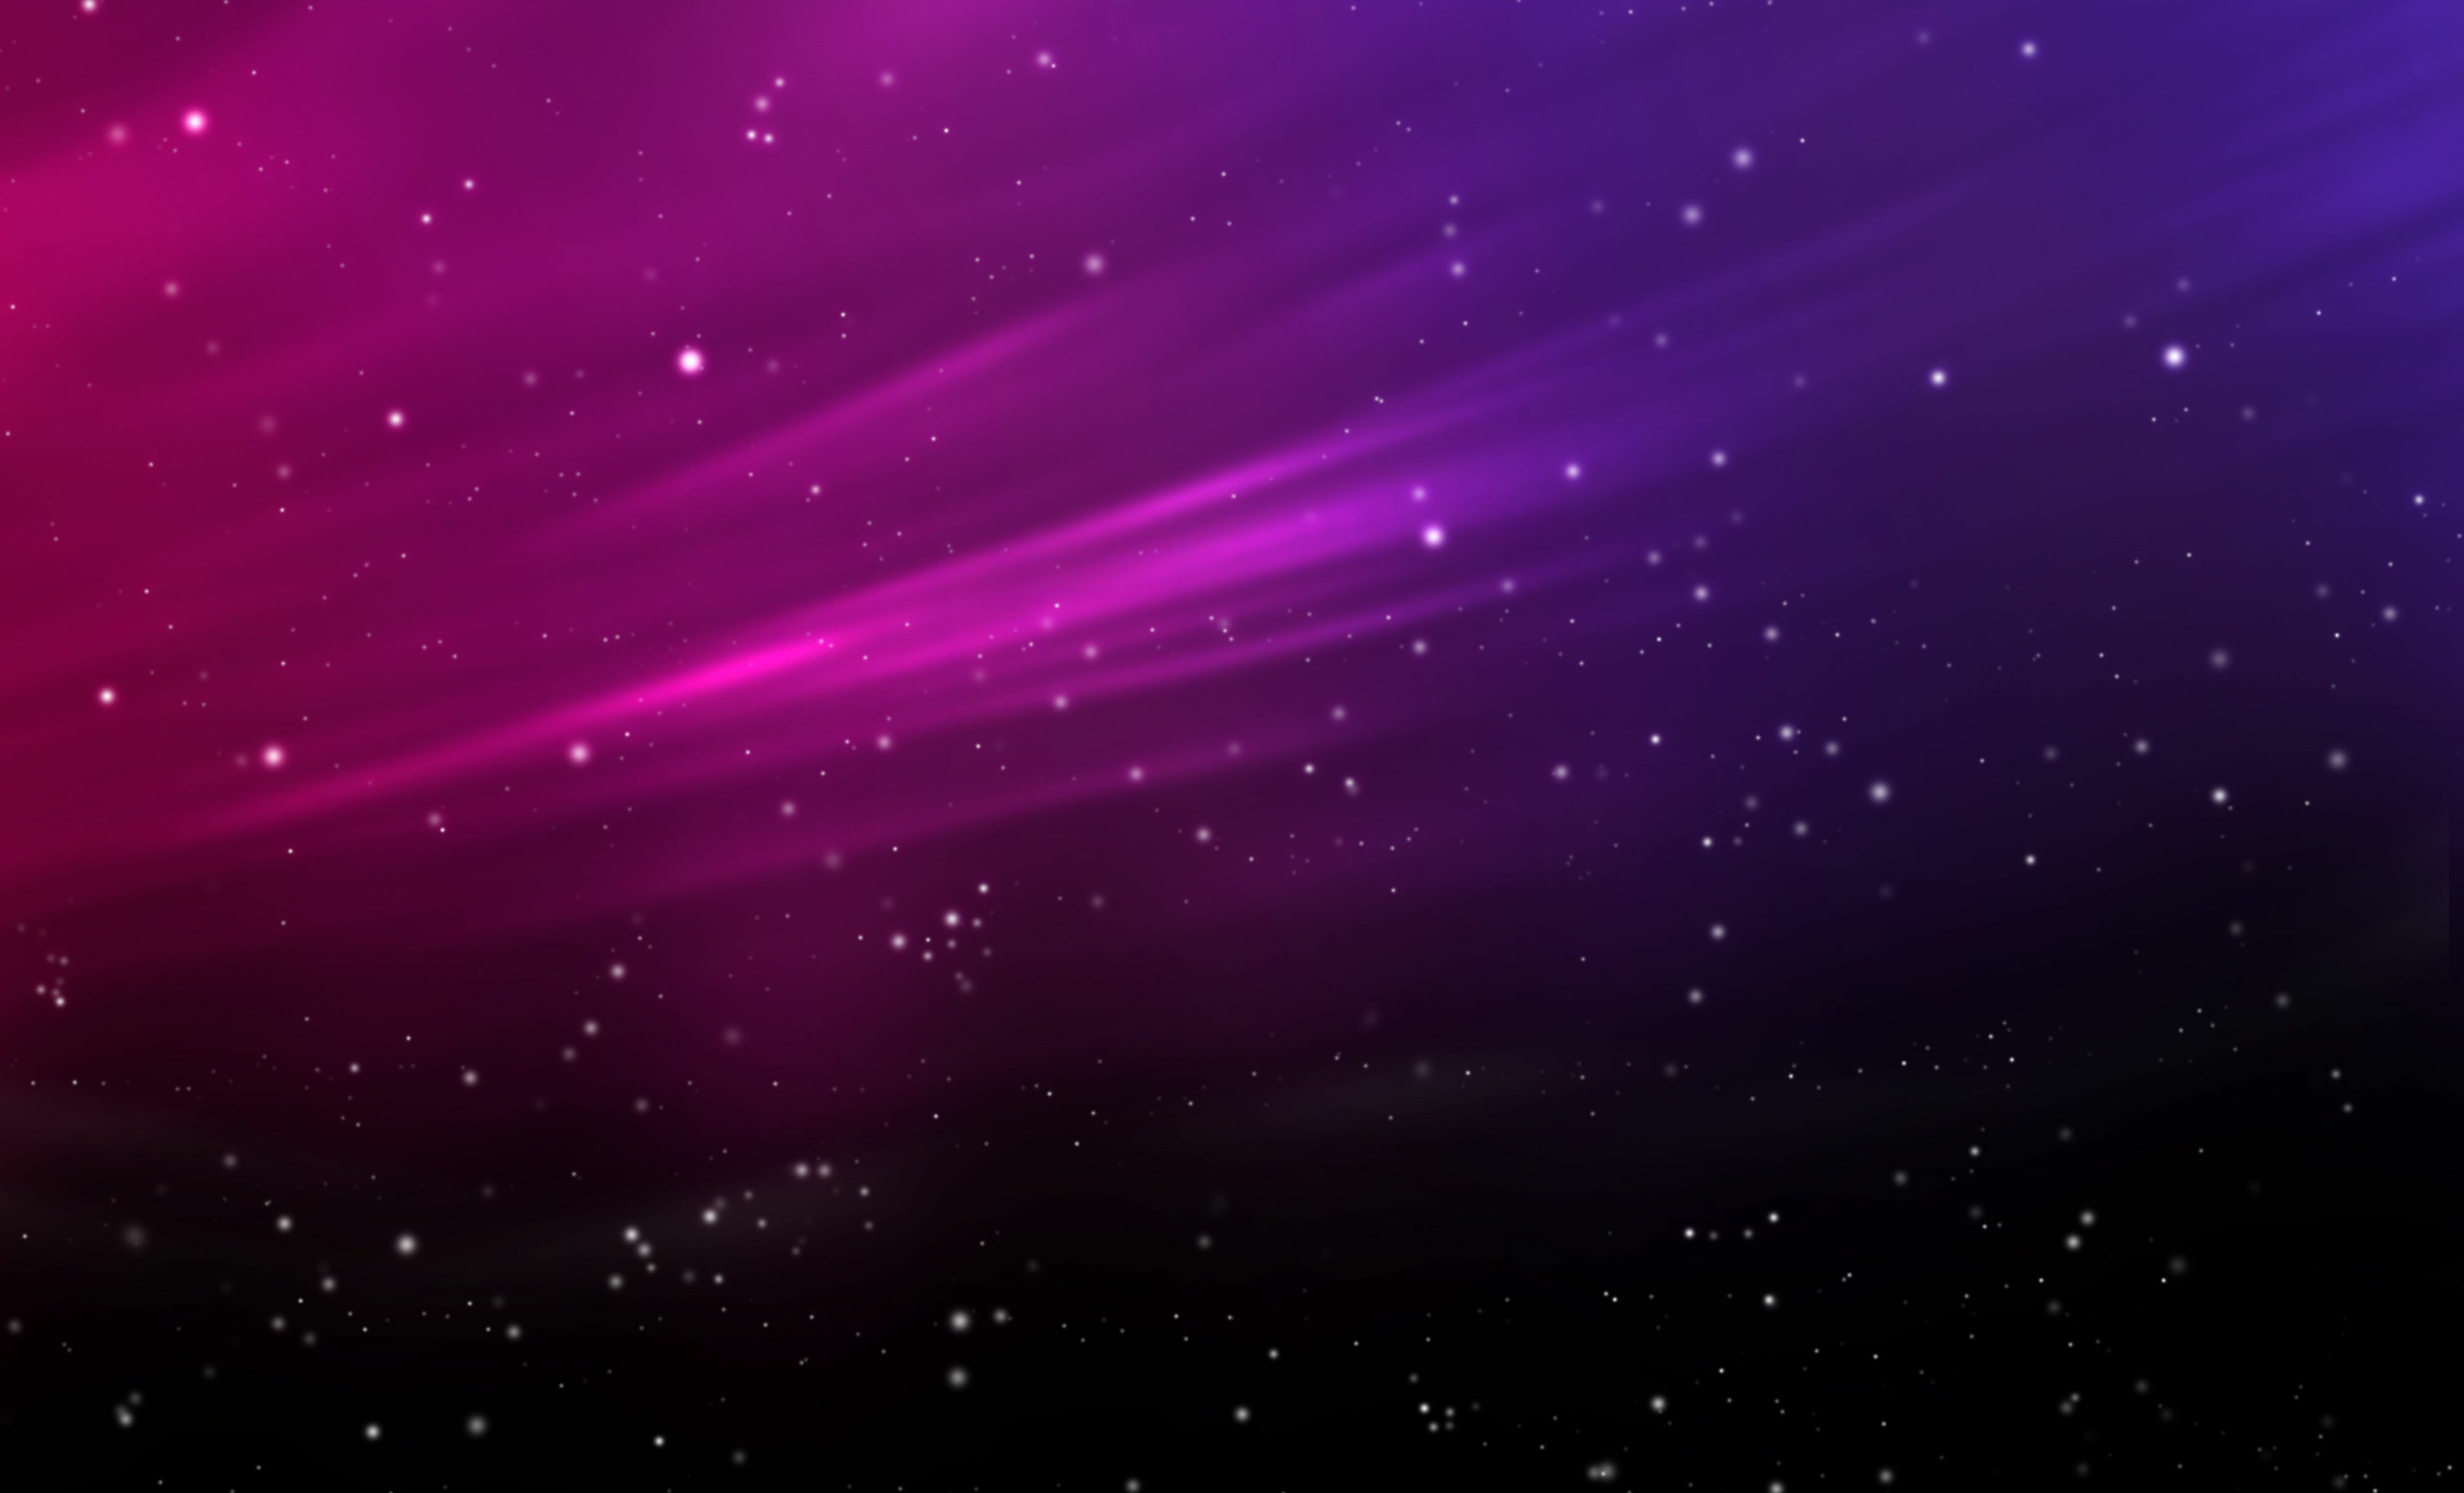 Purple Wallpaper: HD, 4K, 5K for PC and Mobile. Download free image for iPhone, Android